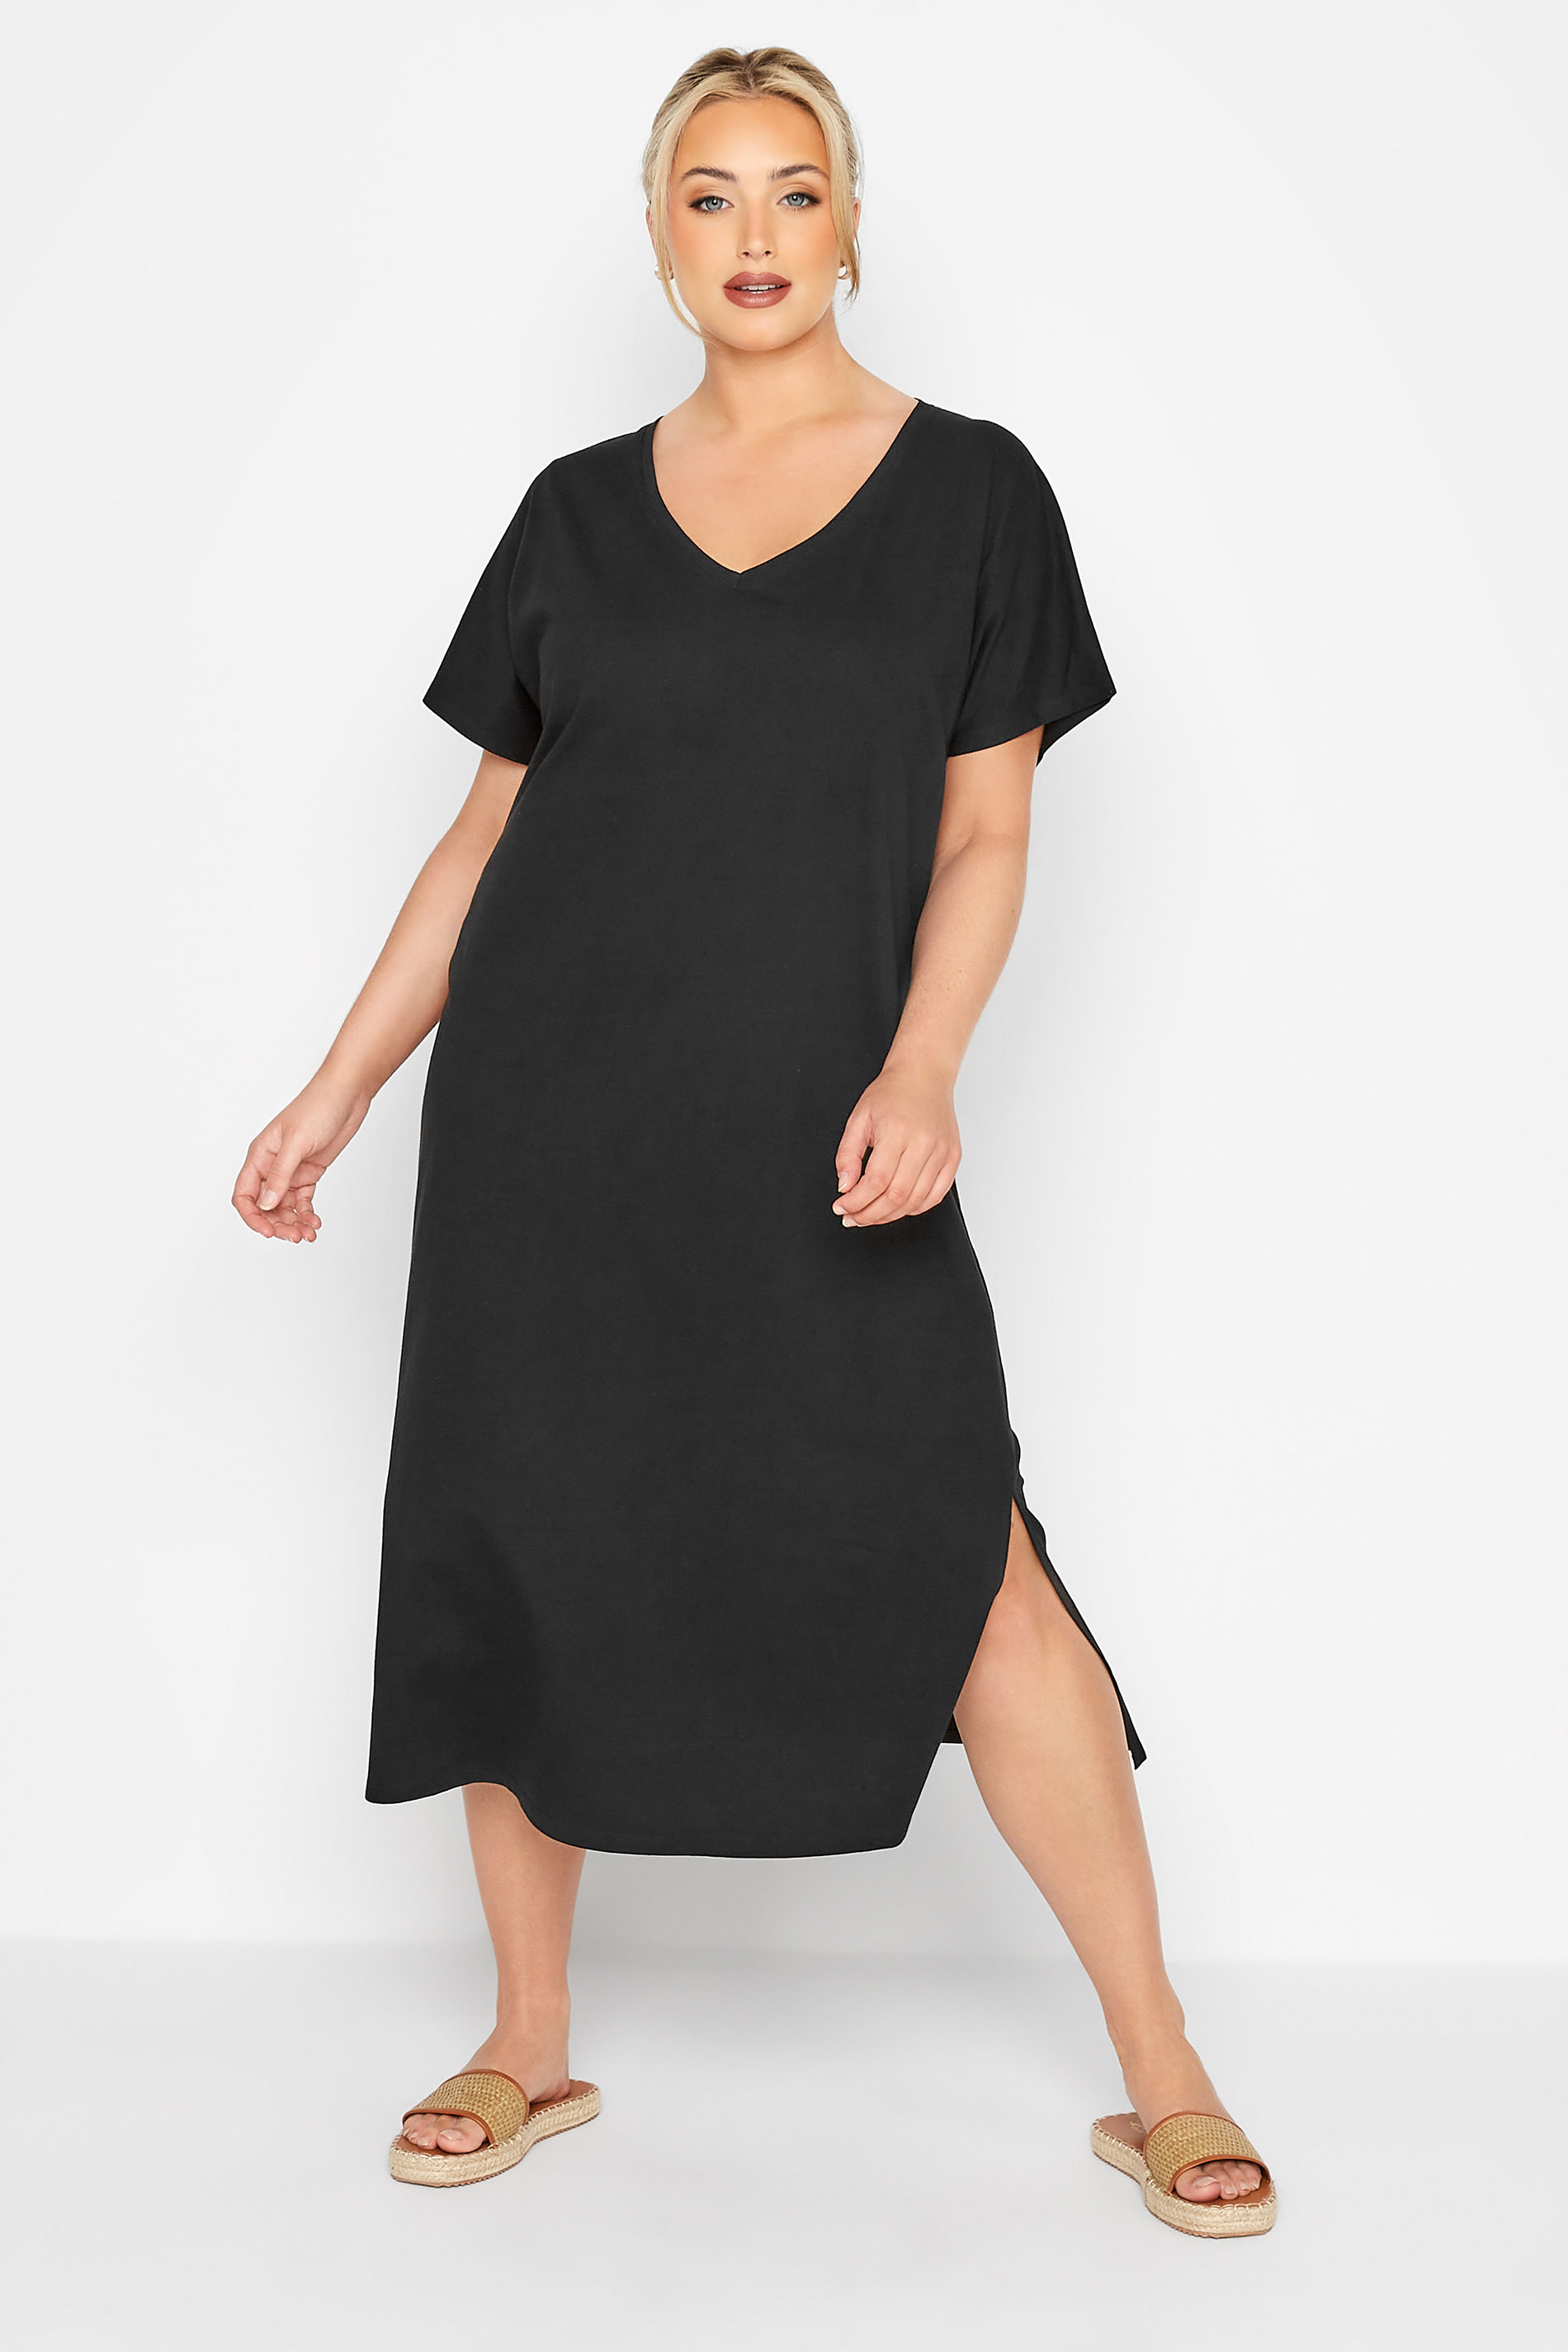 Robes Grande Taille Grande taille  Robes Noires | LIMITED COLLECTION - Robe T-Shirt Midaxi Noire - UN28021